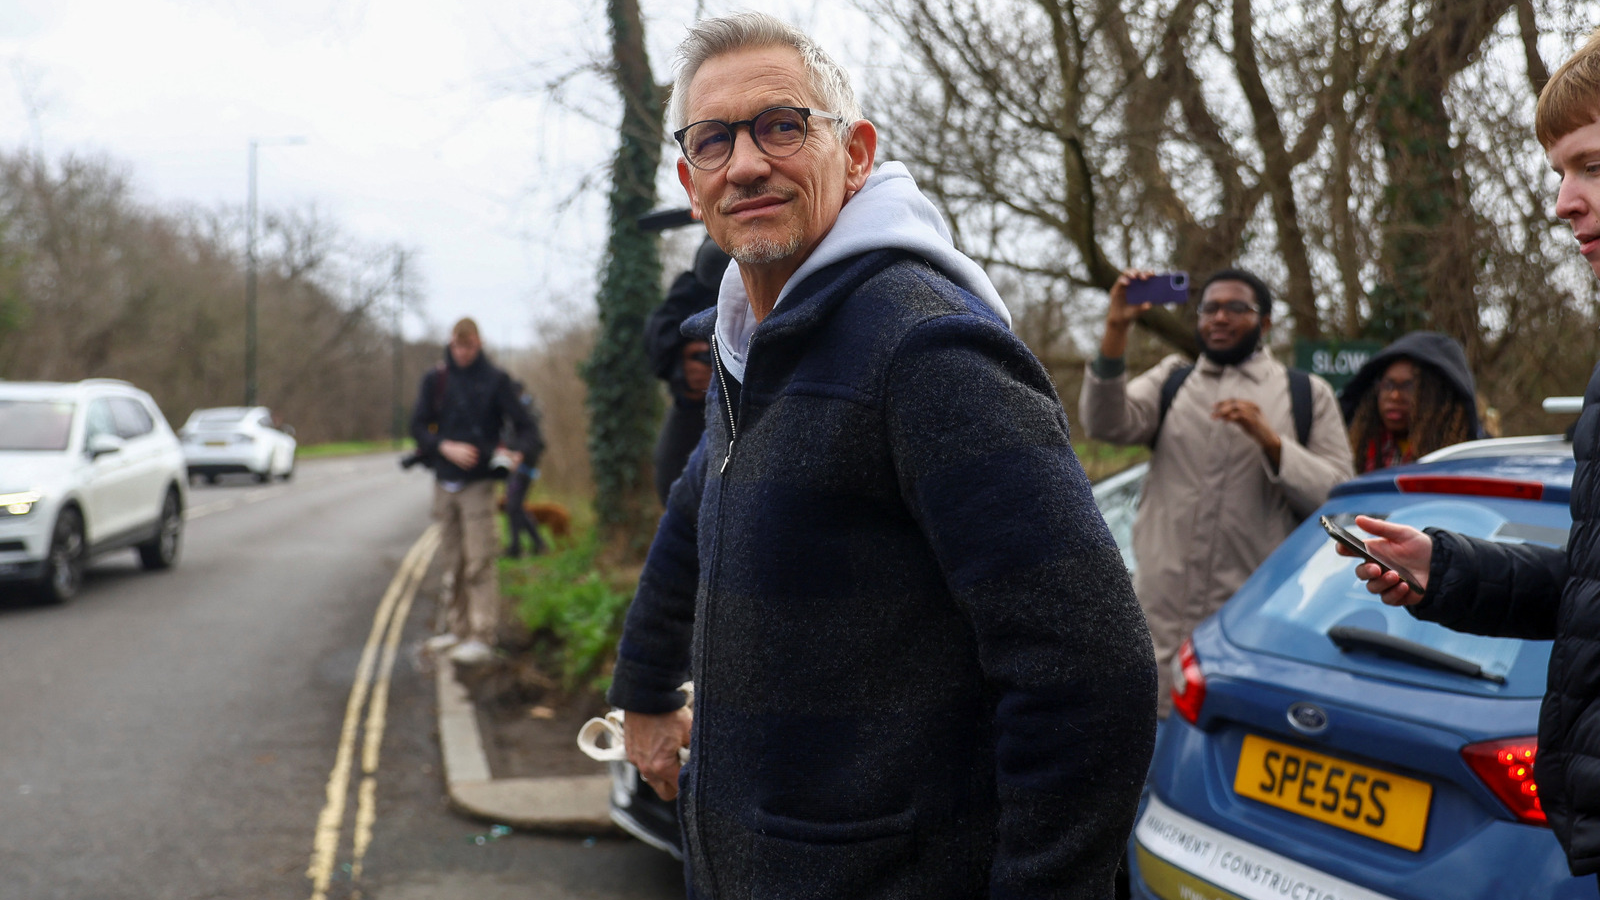 BBC Sport presenter and former England striker Gary Lineker will resume his role as presenter of Match of the Day after reaching an agreement with the corporation over his use of social media. /Reuters/Hannah McKay.